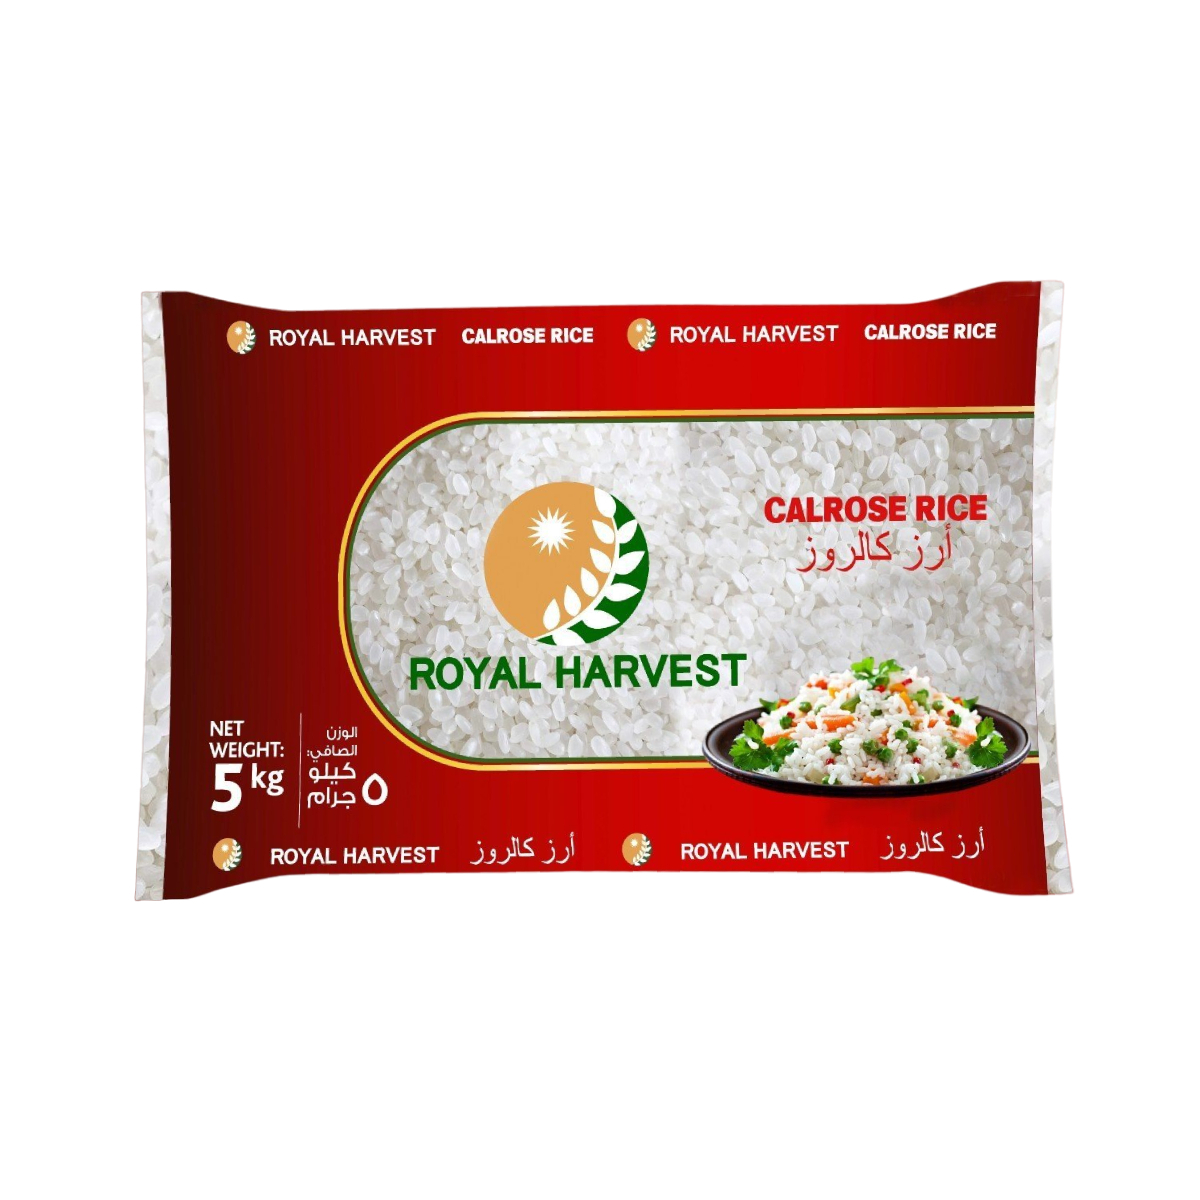 Buy Royal Harvest Calrose Rice 5 kg Online at Best Price | Egyptian Rice | Lulu Kuwait in Kuwait